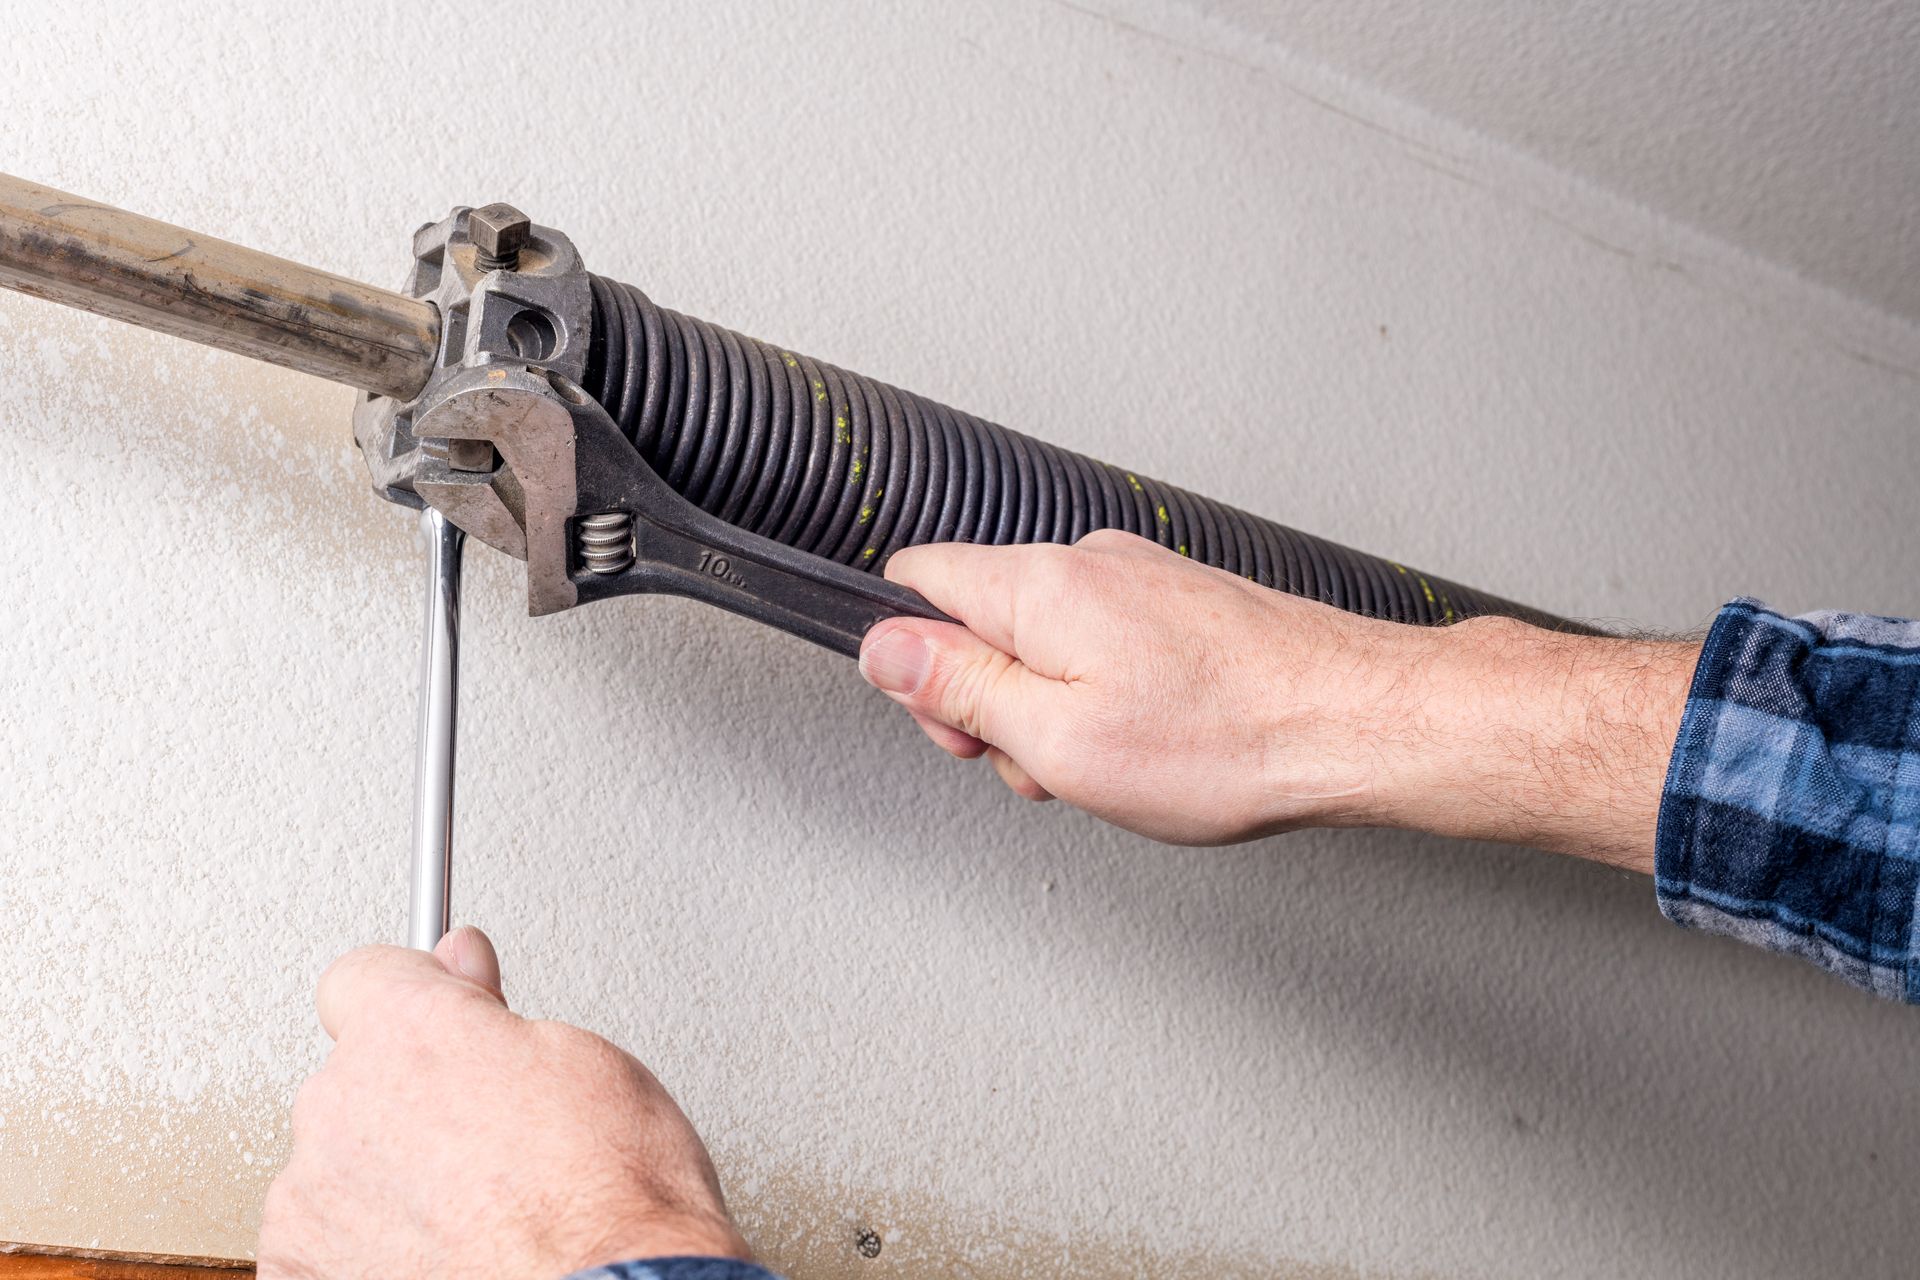 Home repairman using a variety of tools to service a garage door spring.